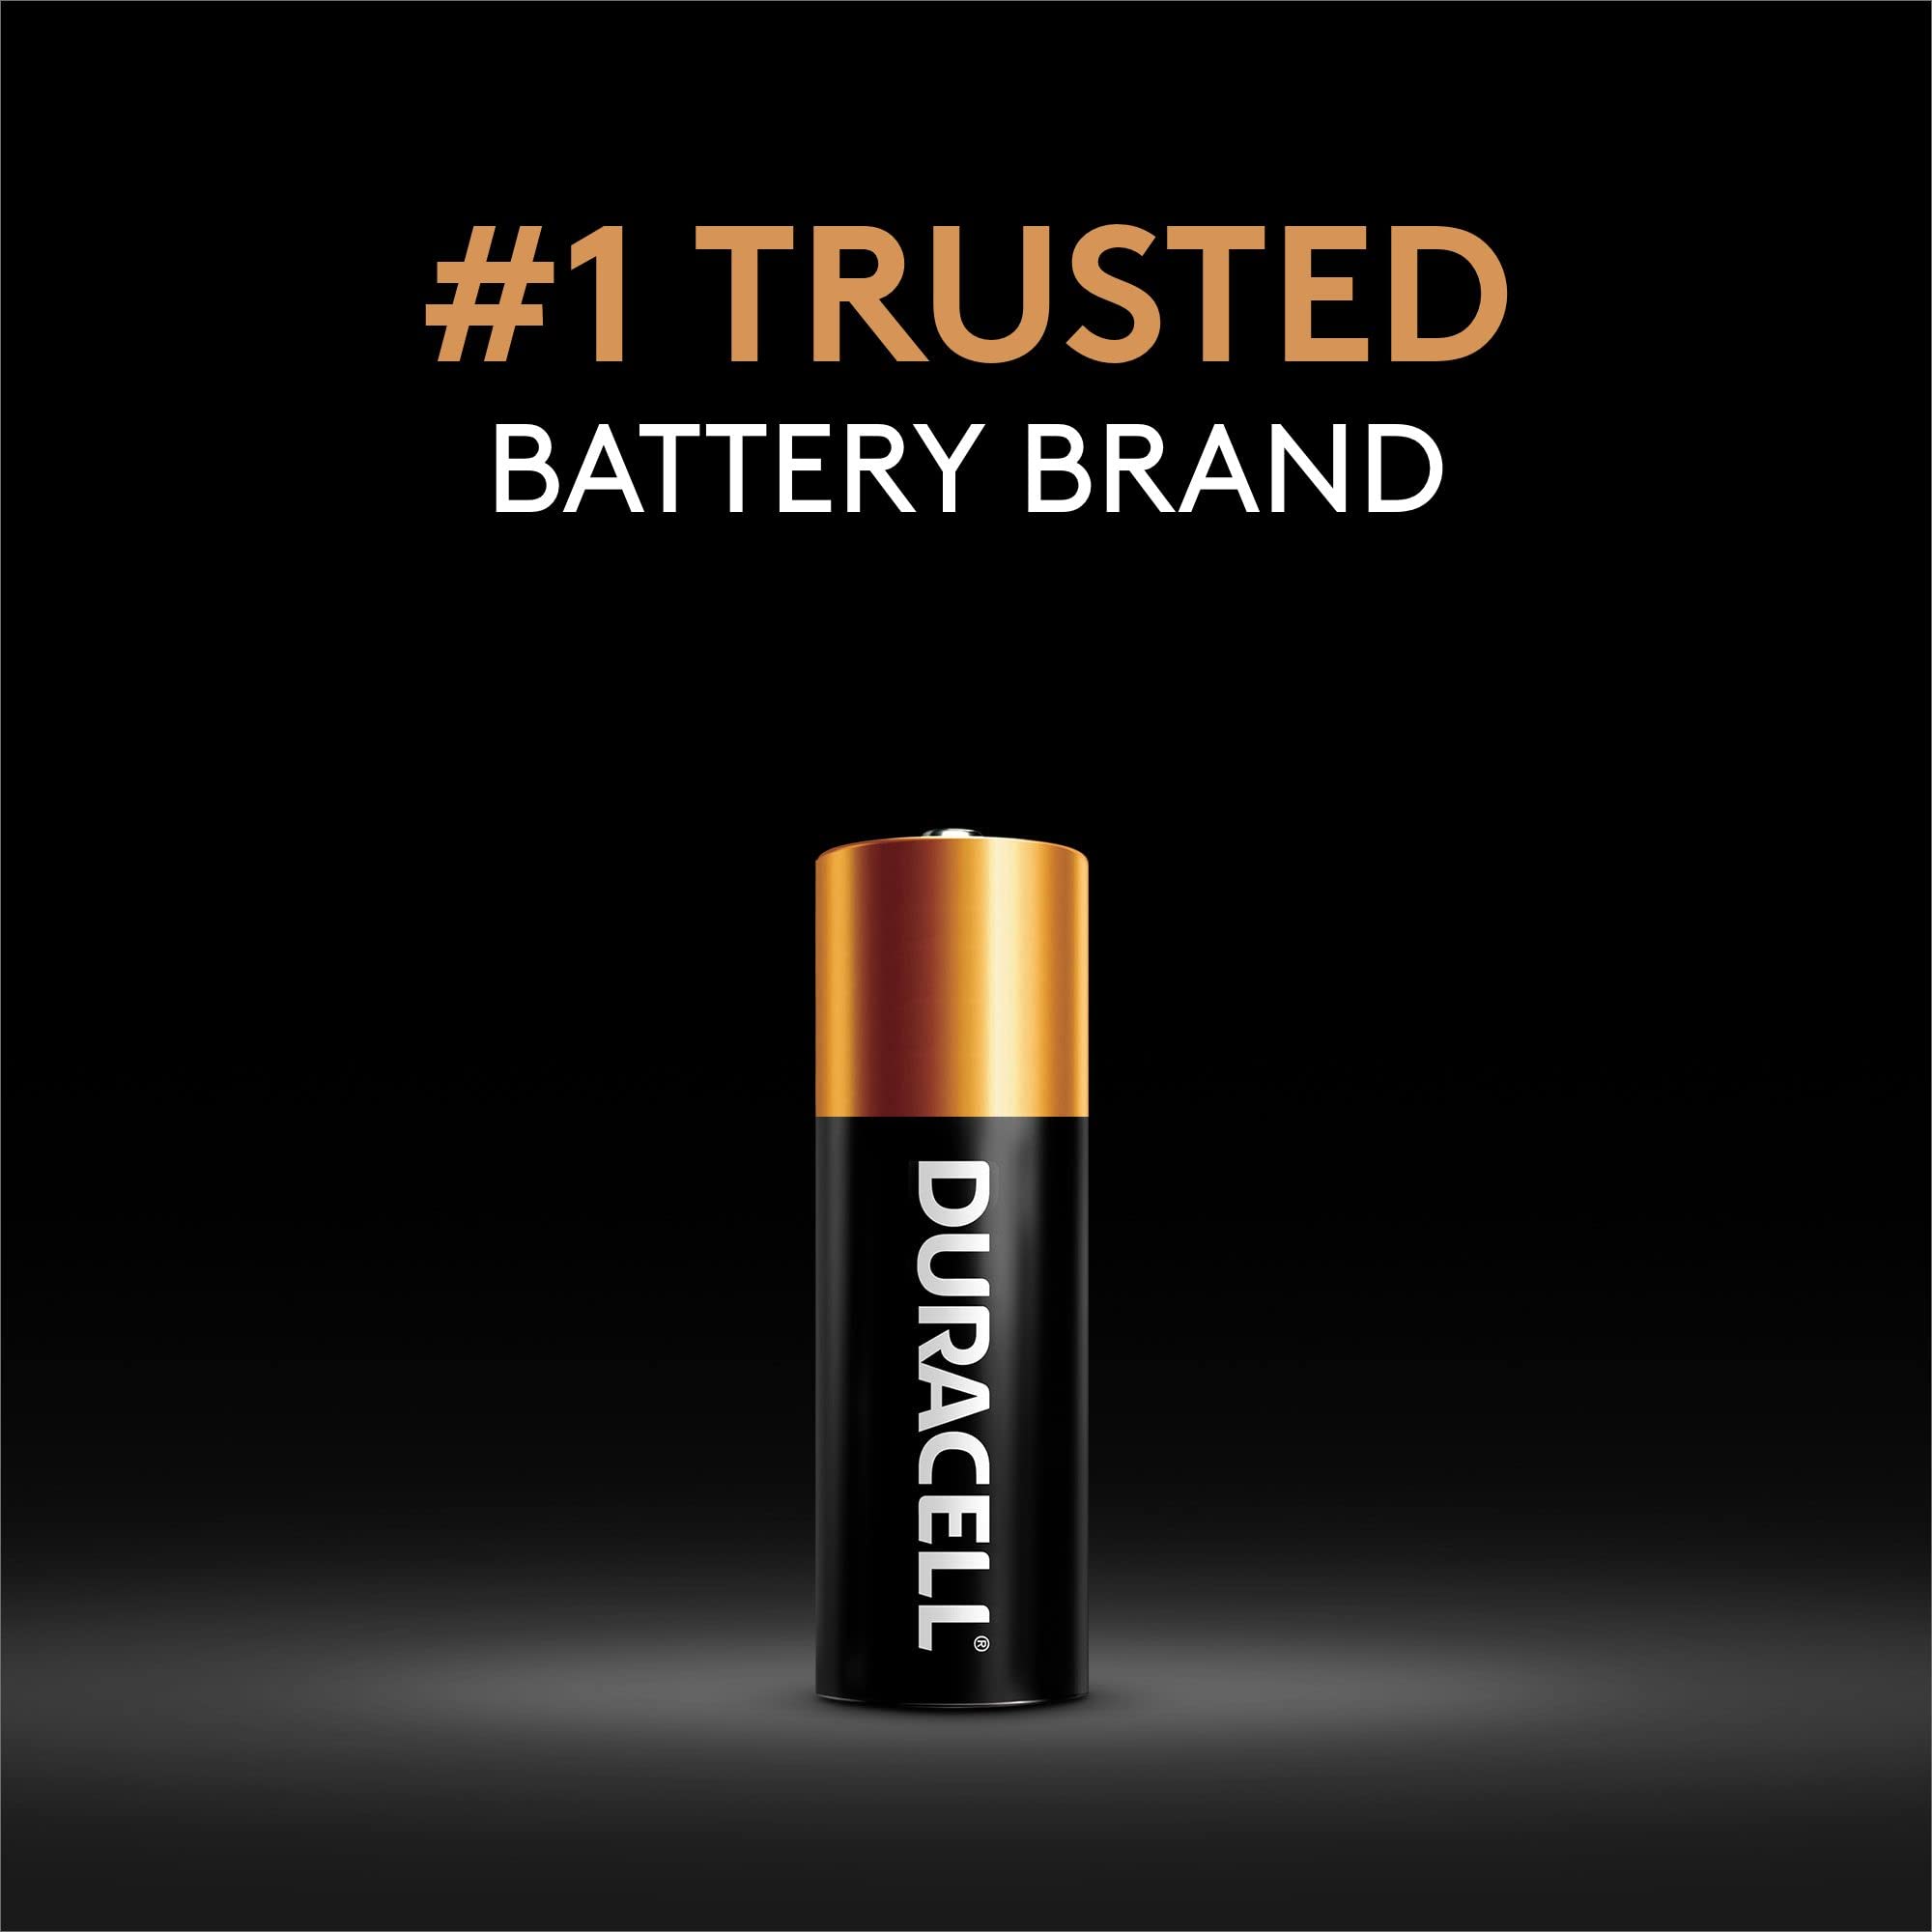 Duracell 27 12V Alkaline Battery, 1 Count Pack, 27 12 Volt Alkaline Battery, Long-Lasting for Key Fobs, Car Alarms, GPS Trackers, and More